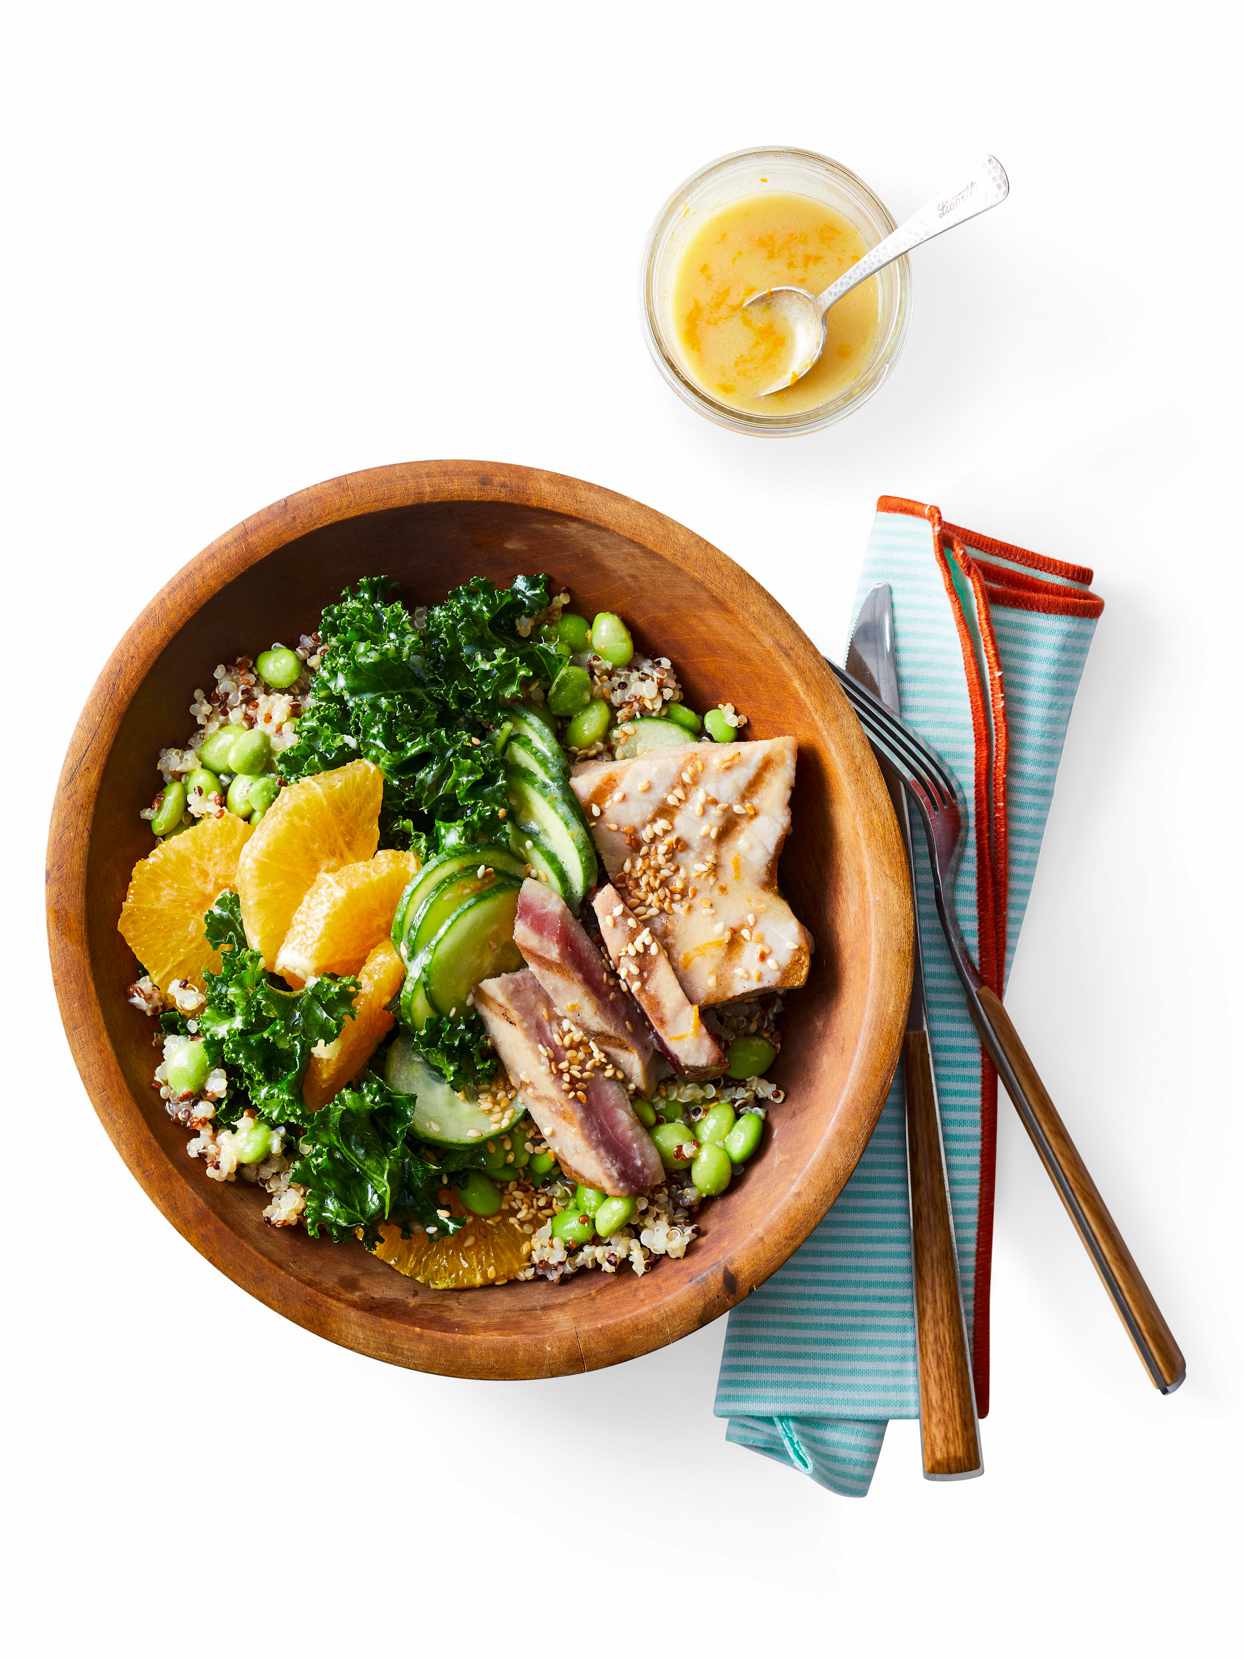 Kale-Quinoa Bowls with Miso Dressing and Tuna